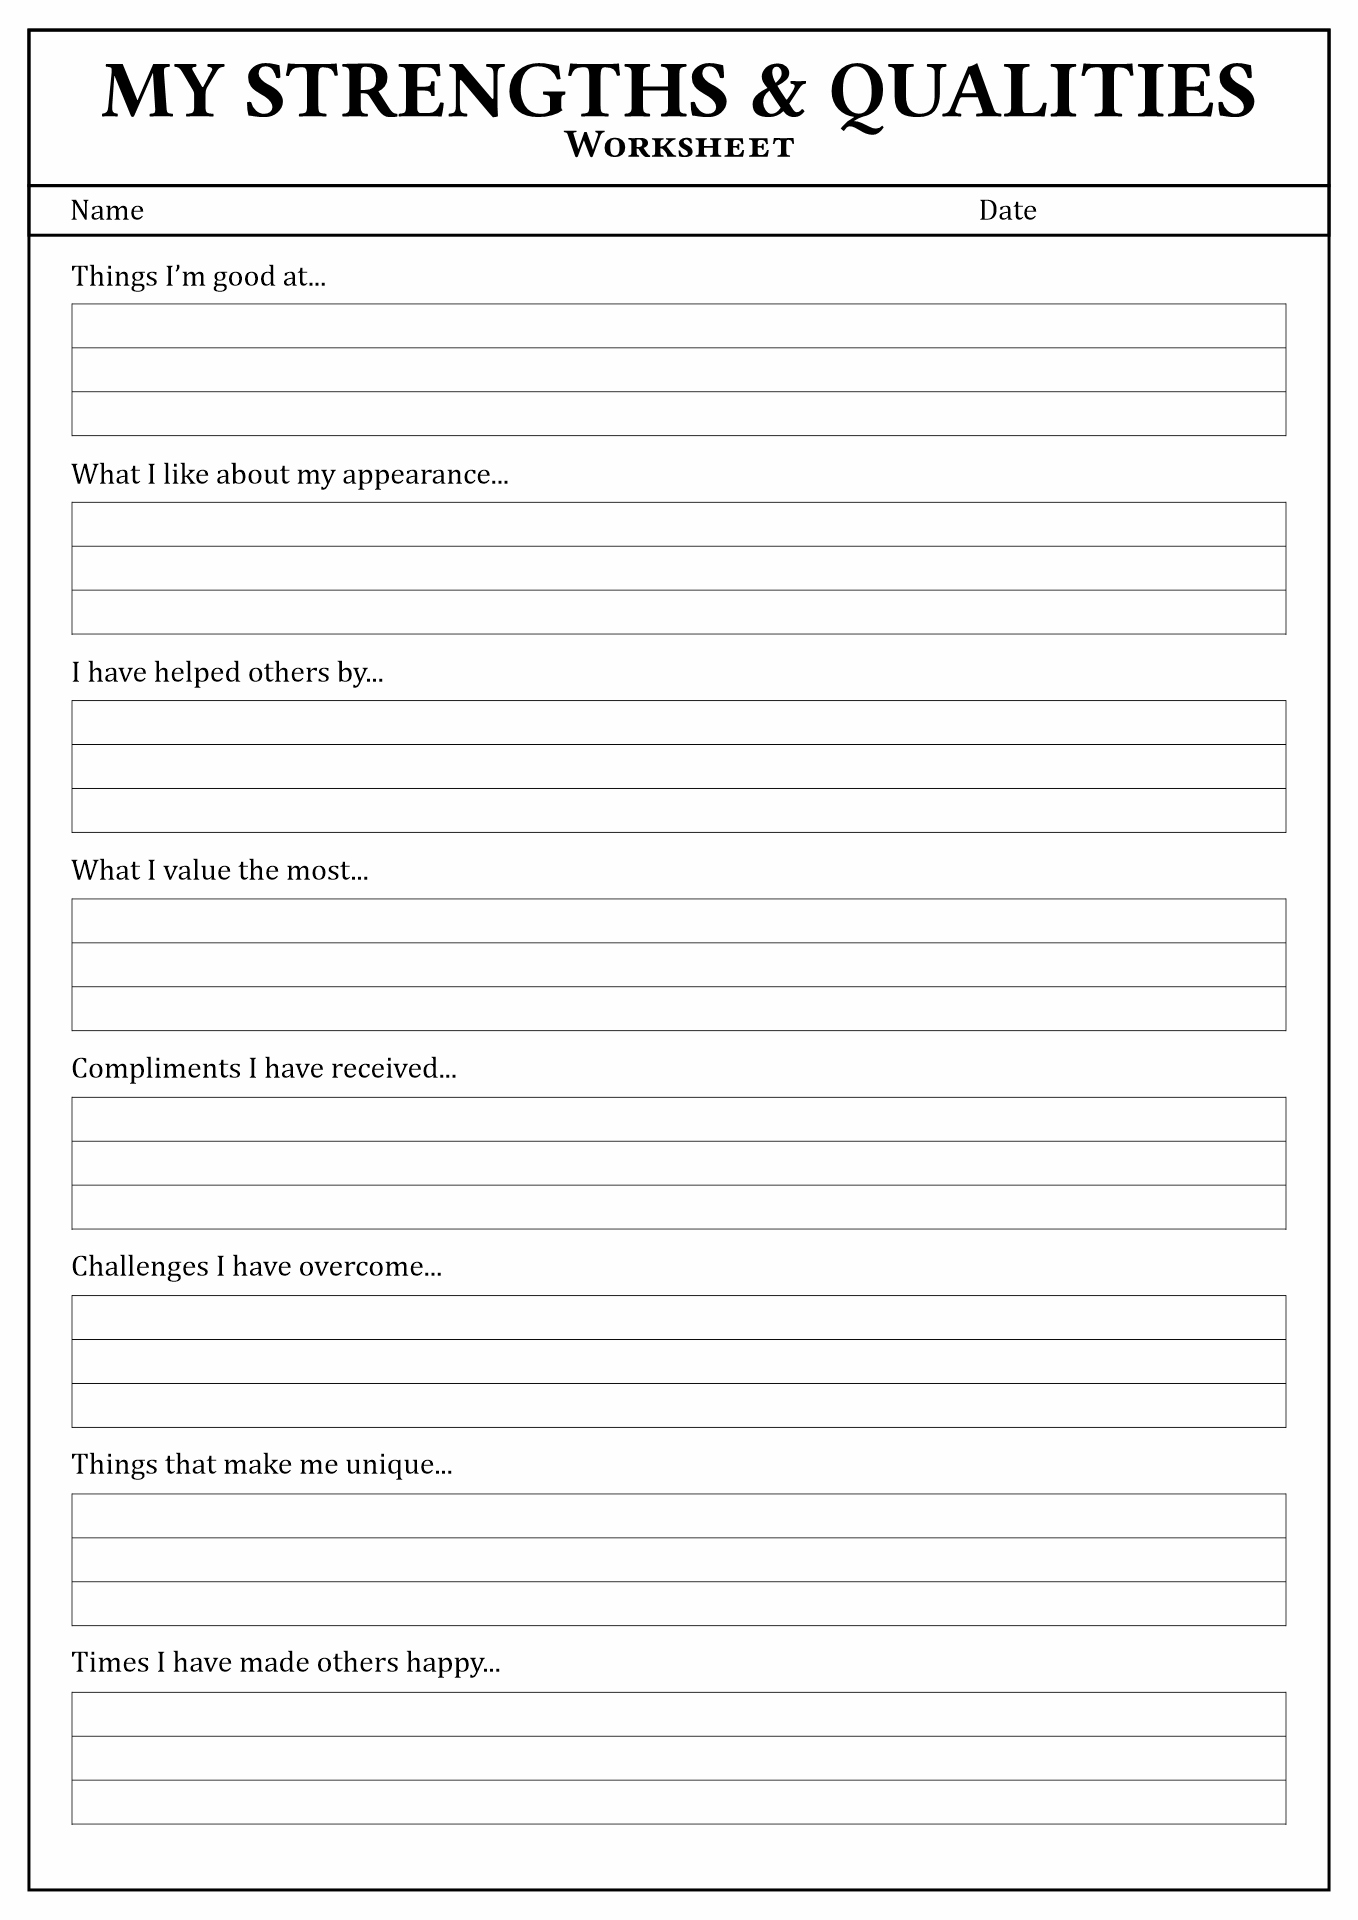 Personal Strengths and Weaknesses Worksheet